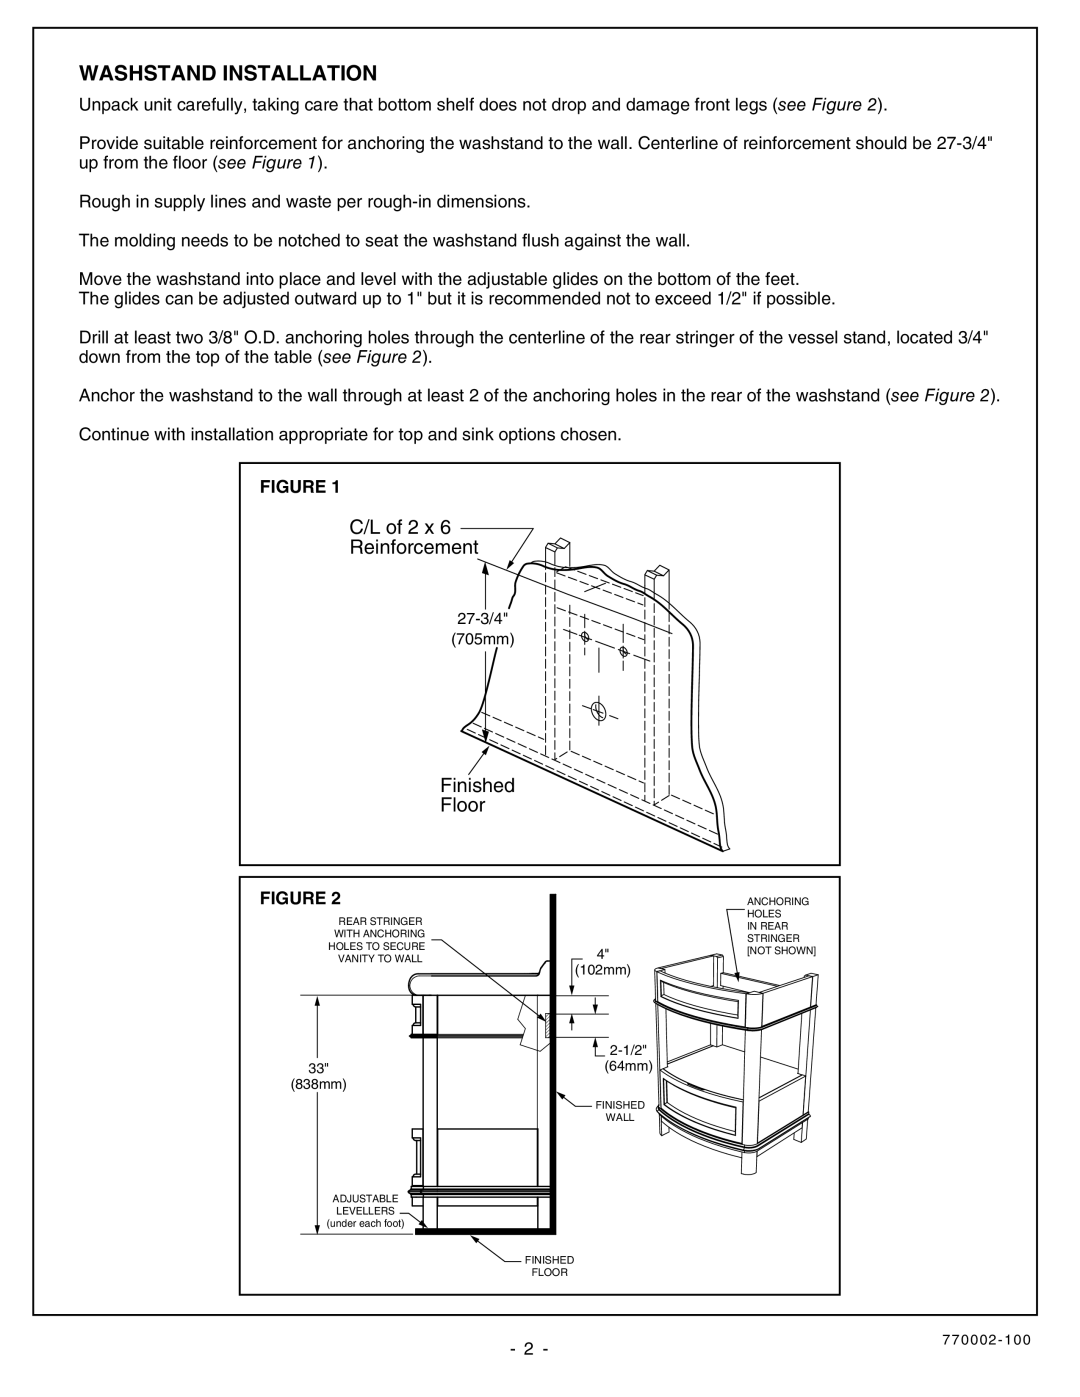 American Standard 9210.224.329 installation instructions Washstand Installation, C/L of 2 x Reinforcement, Finished Floor 